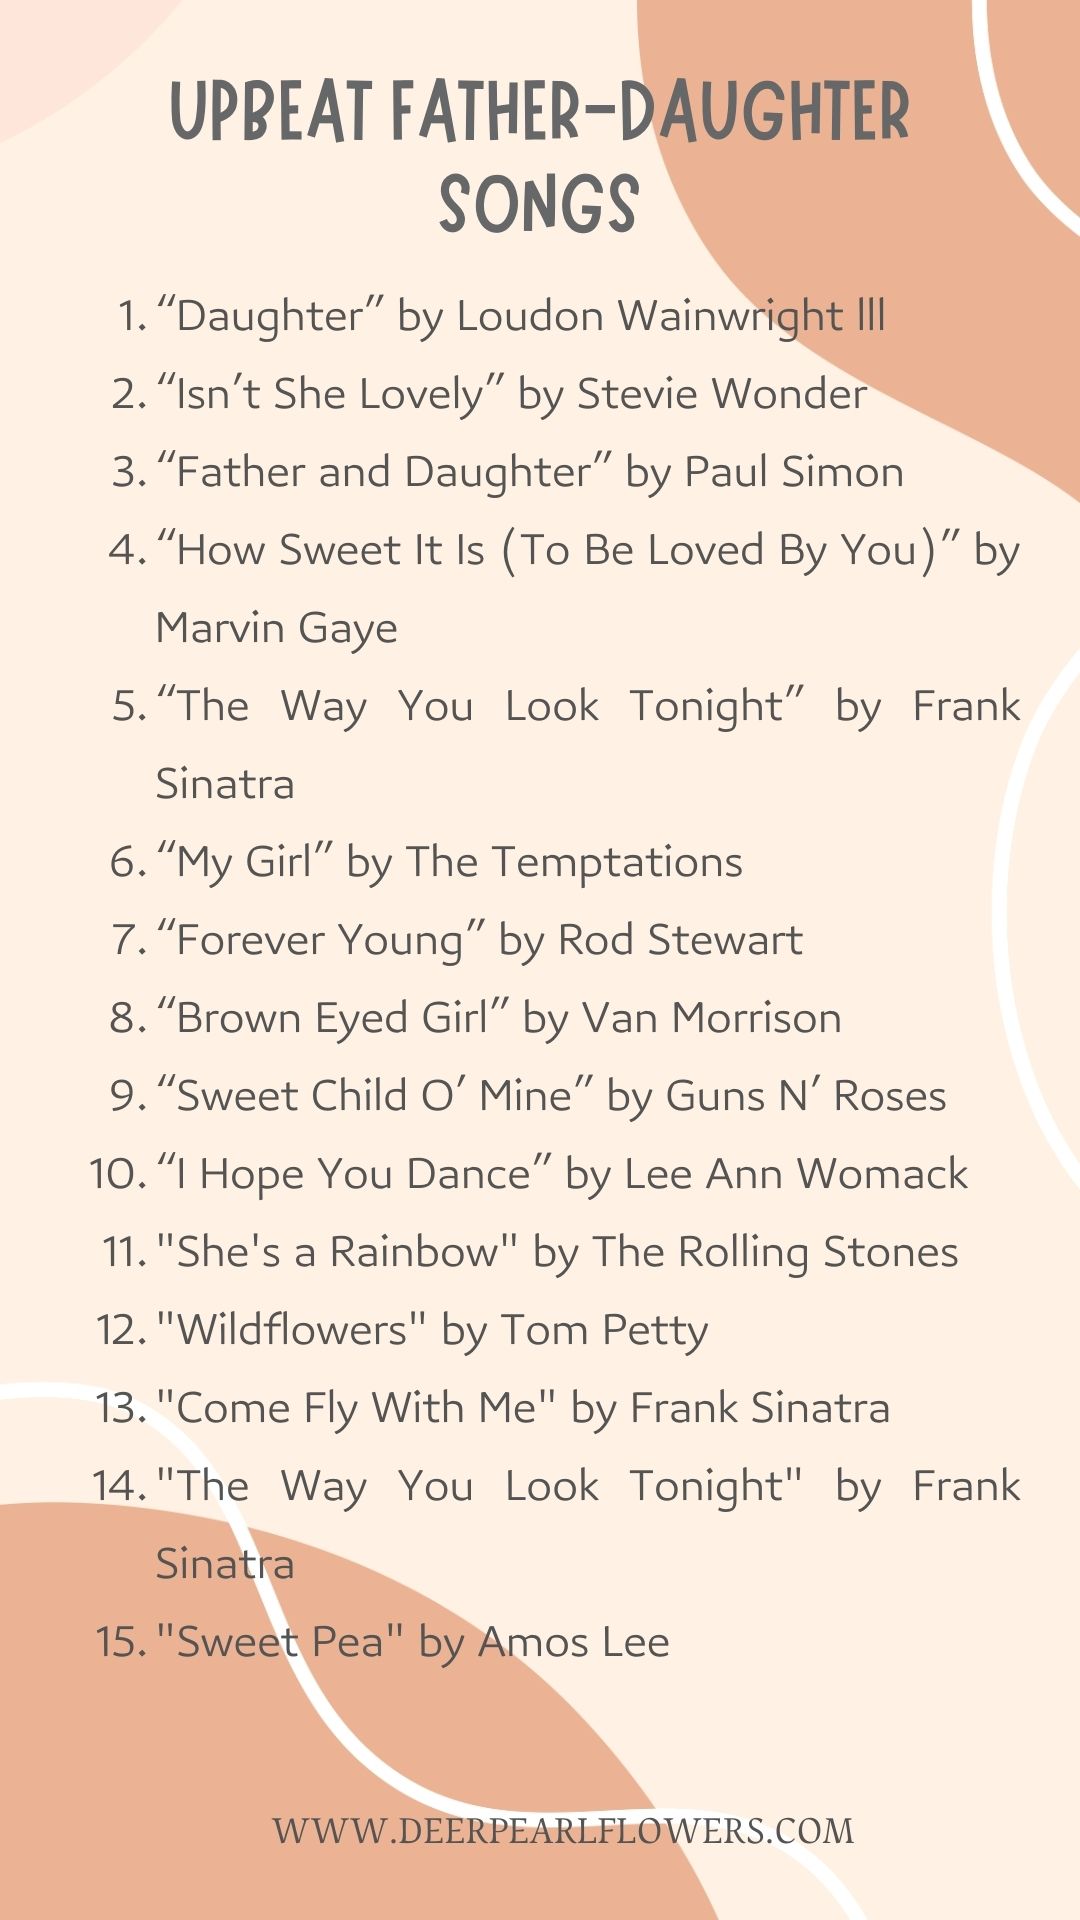 Upbeat Father-Daughter Songs